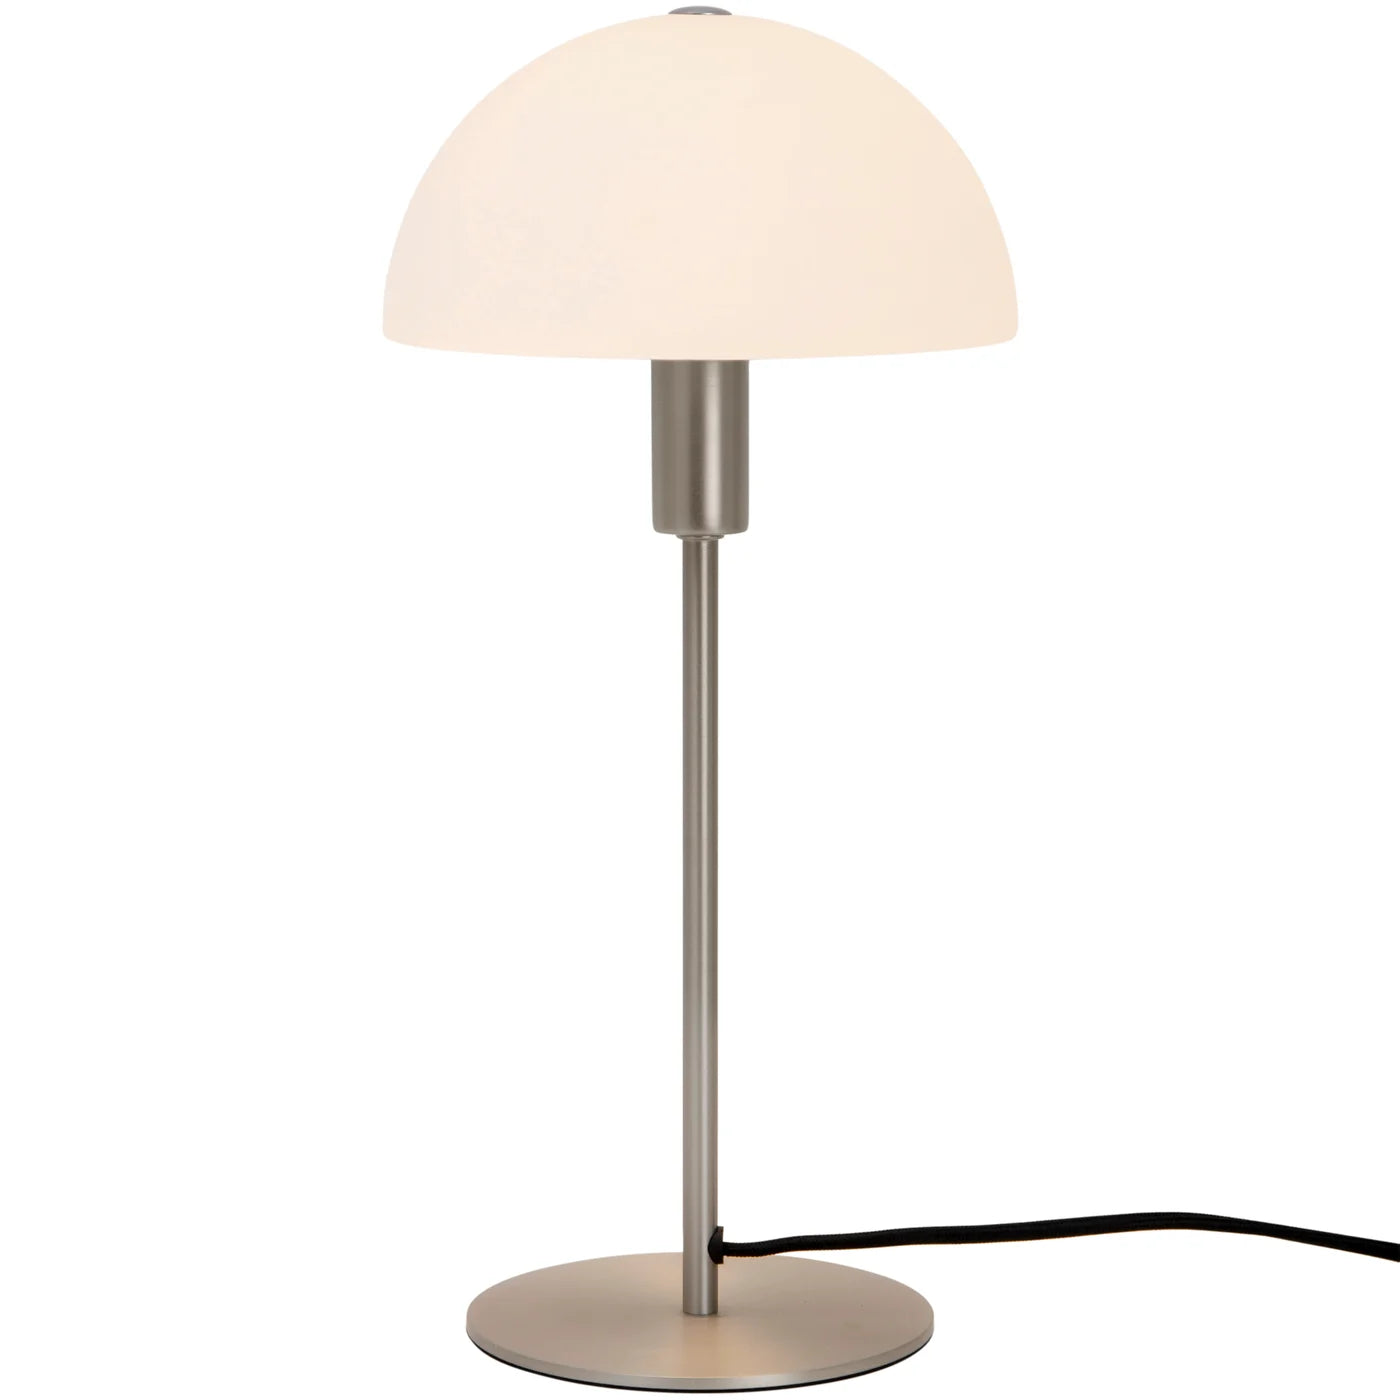 ELLEN table lamp silver with glass shade - Eye on Design